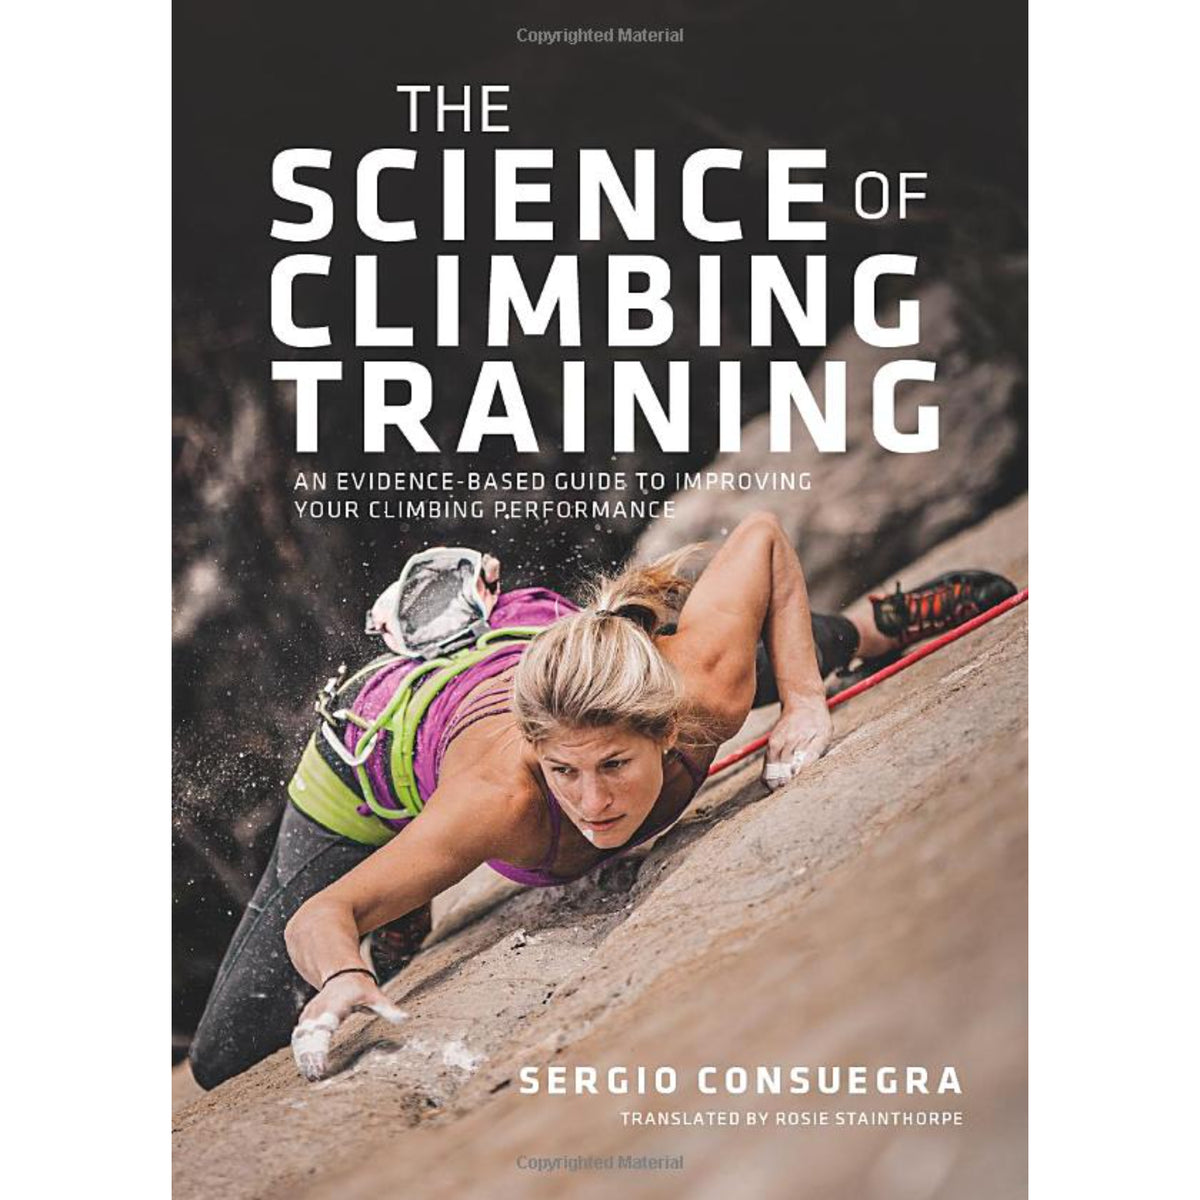 The Science Of Climbing Training book